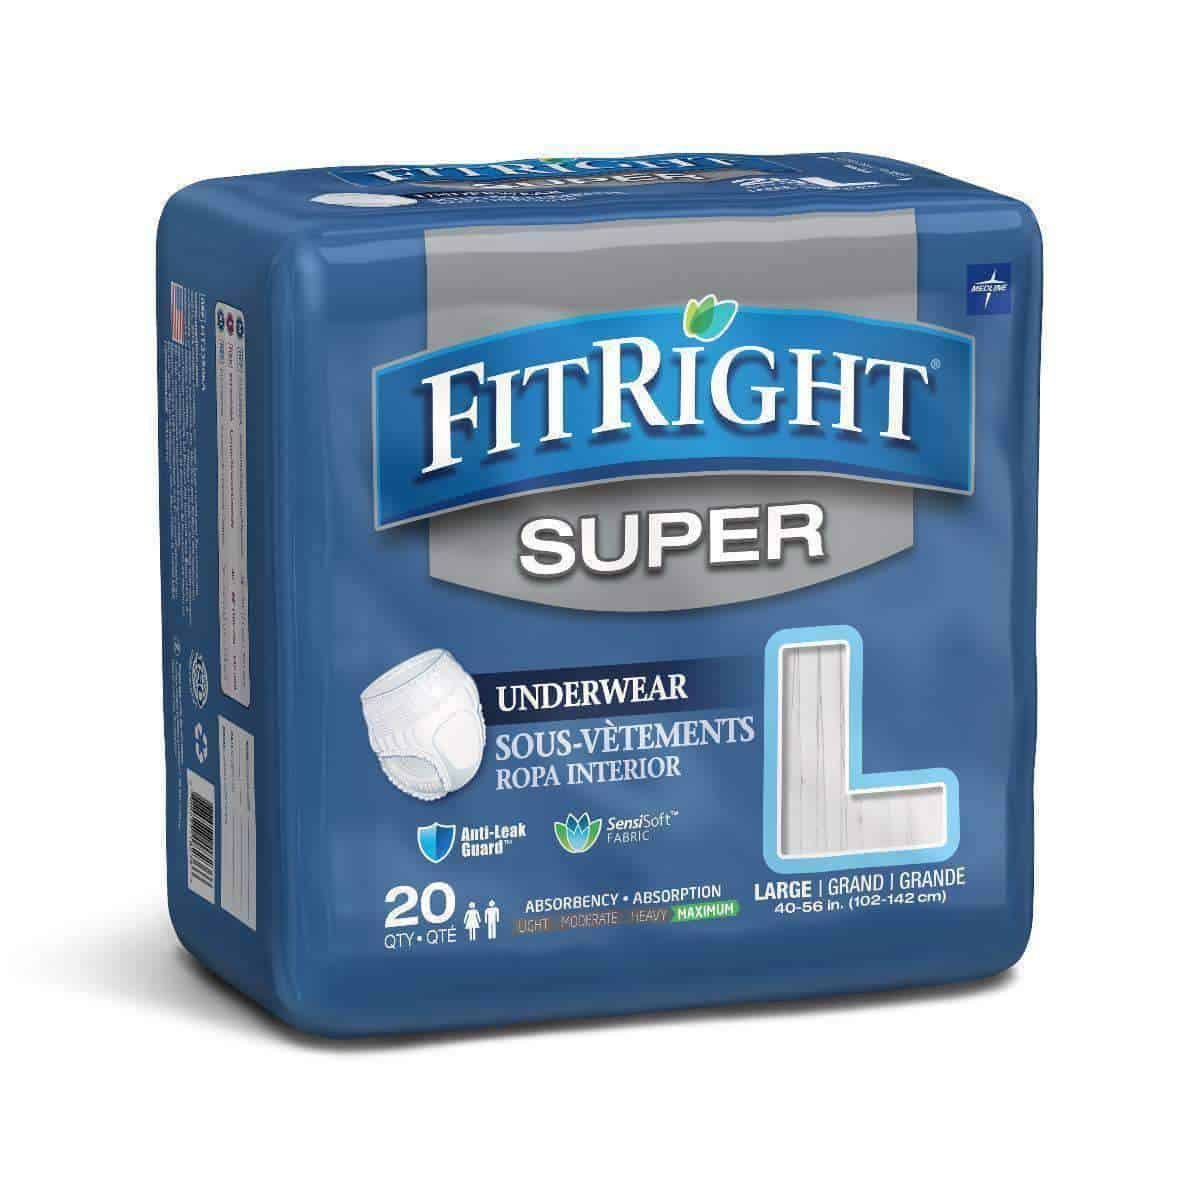 FitRight Super Adult Incontinence Underwear - Maximum Absorbency Case of 80 - Senior.com Incontinence